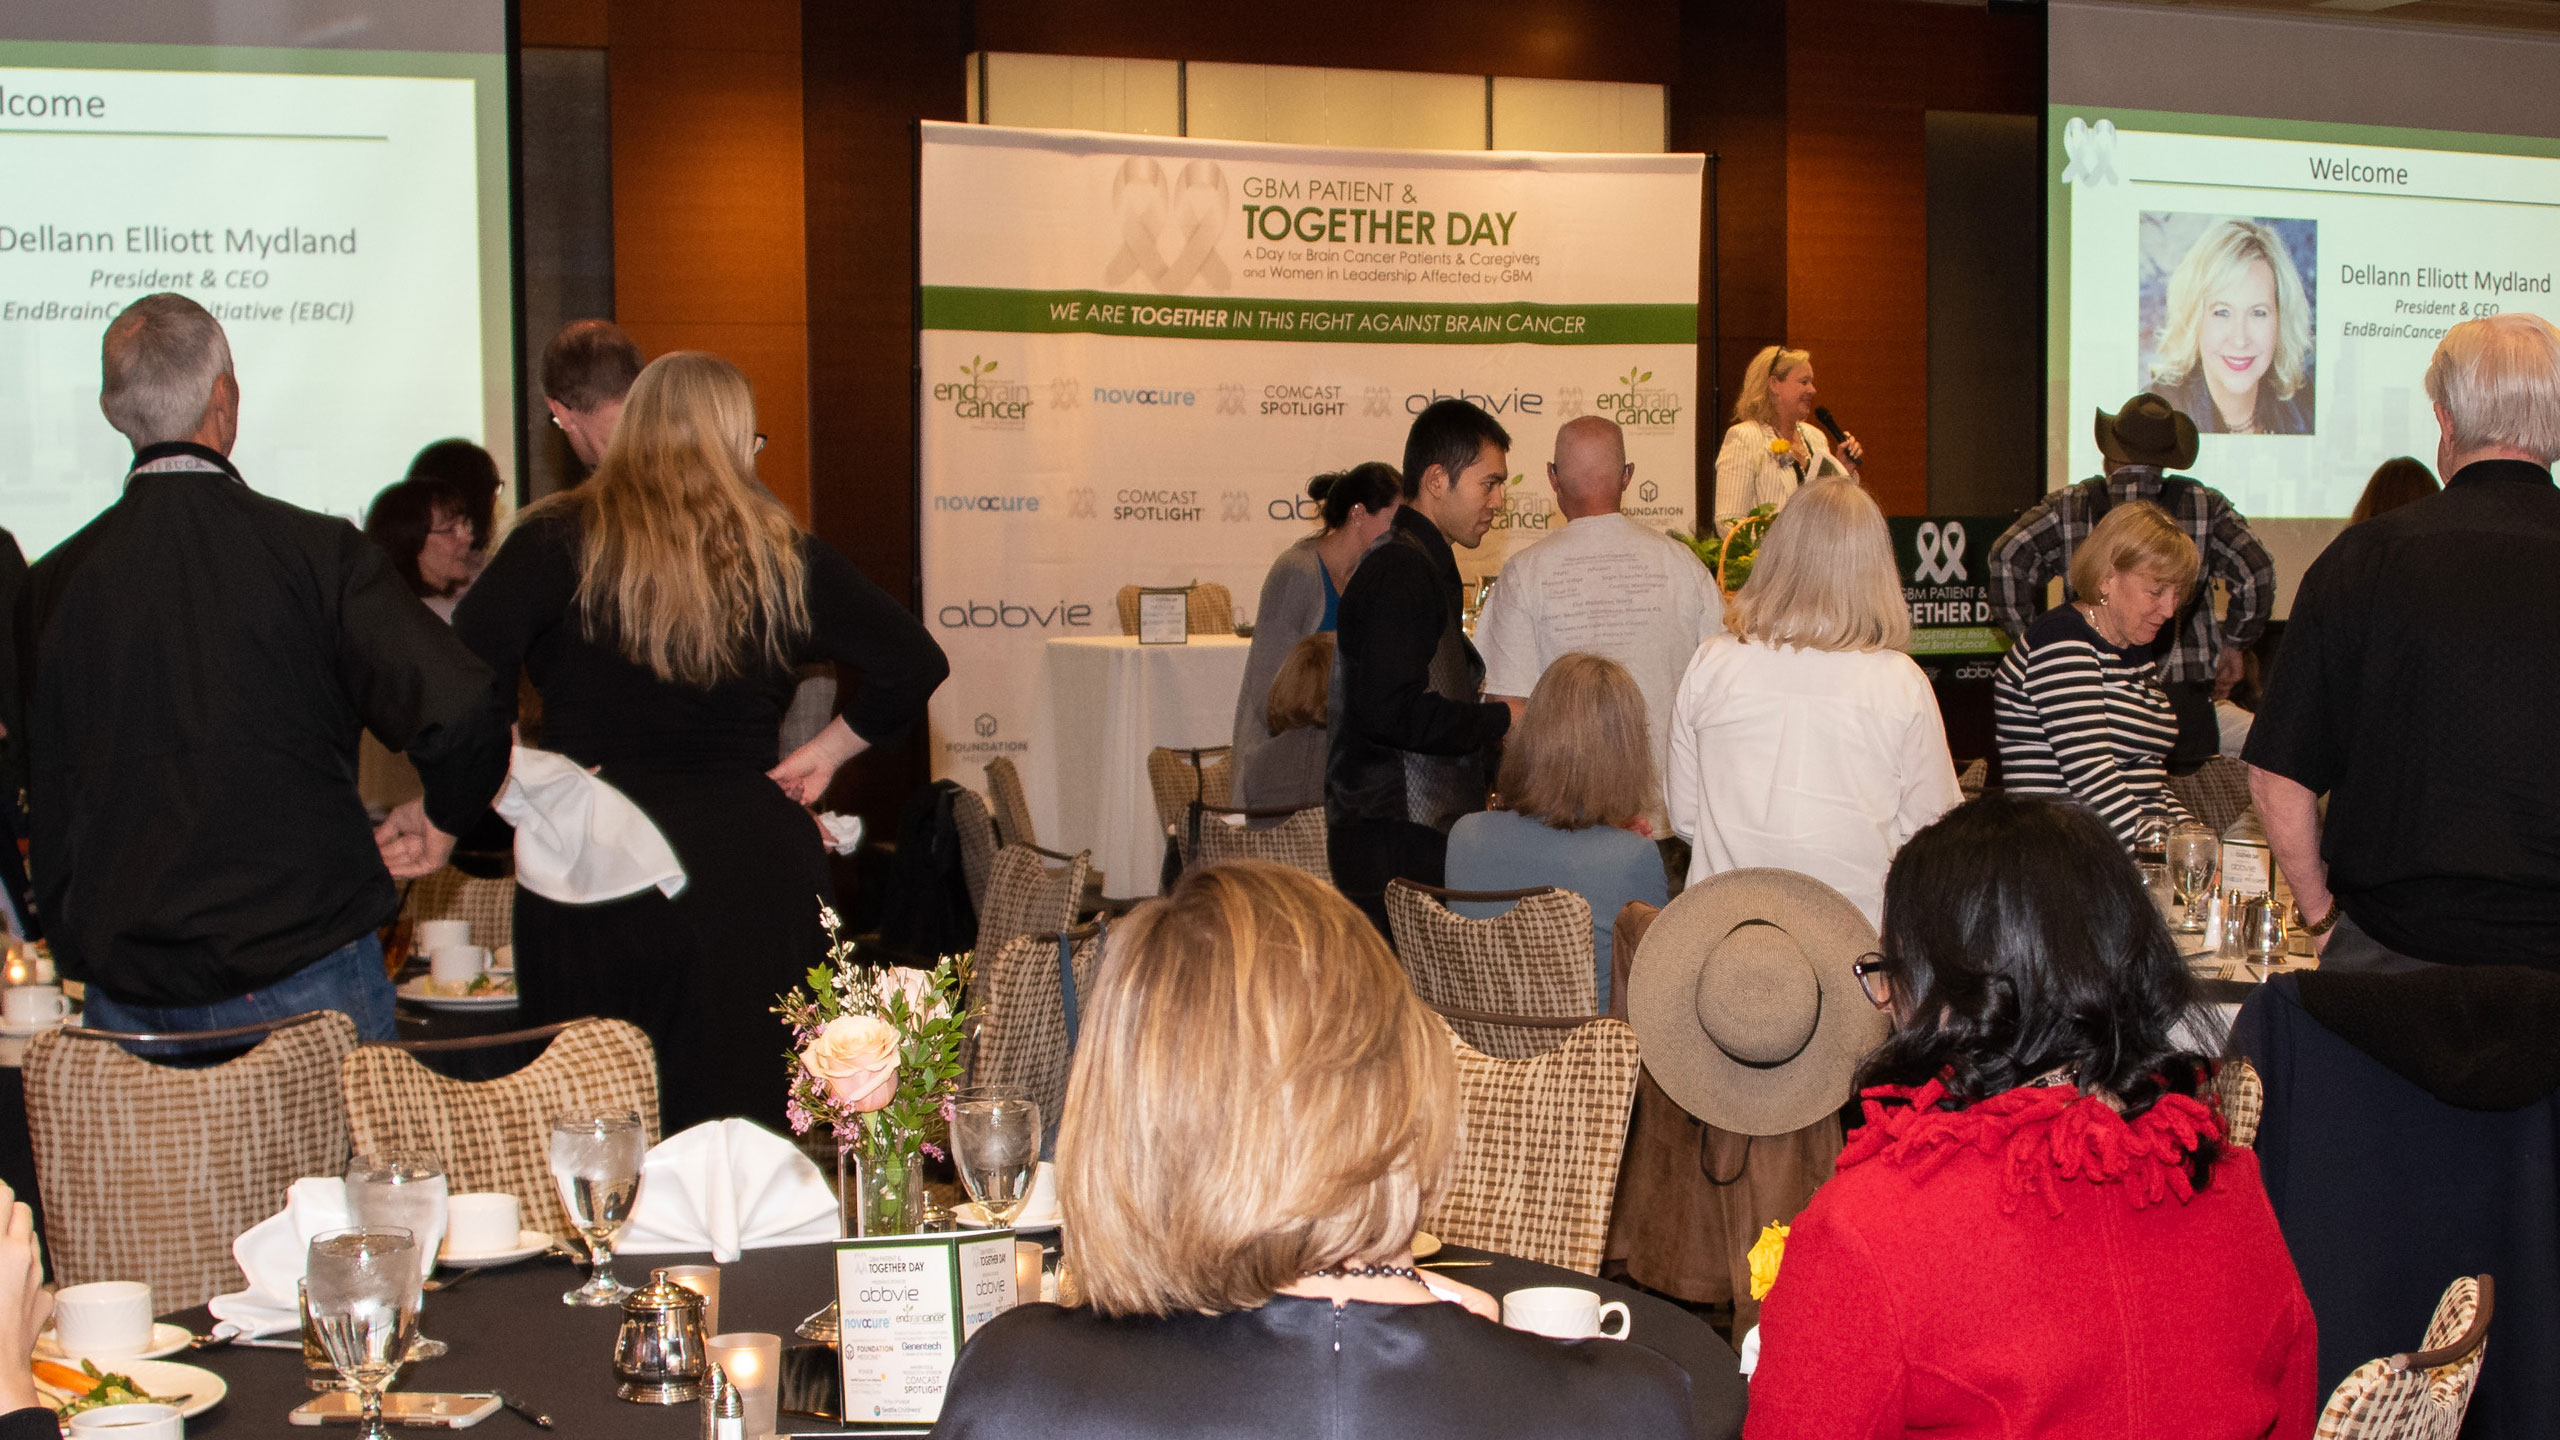 Patients, caregivers, family and friends gathered for GBM Patient & TOGETHER Day in Bellevue, Washington.